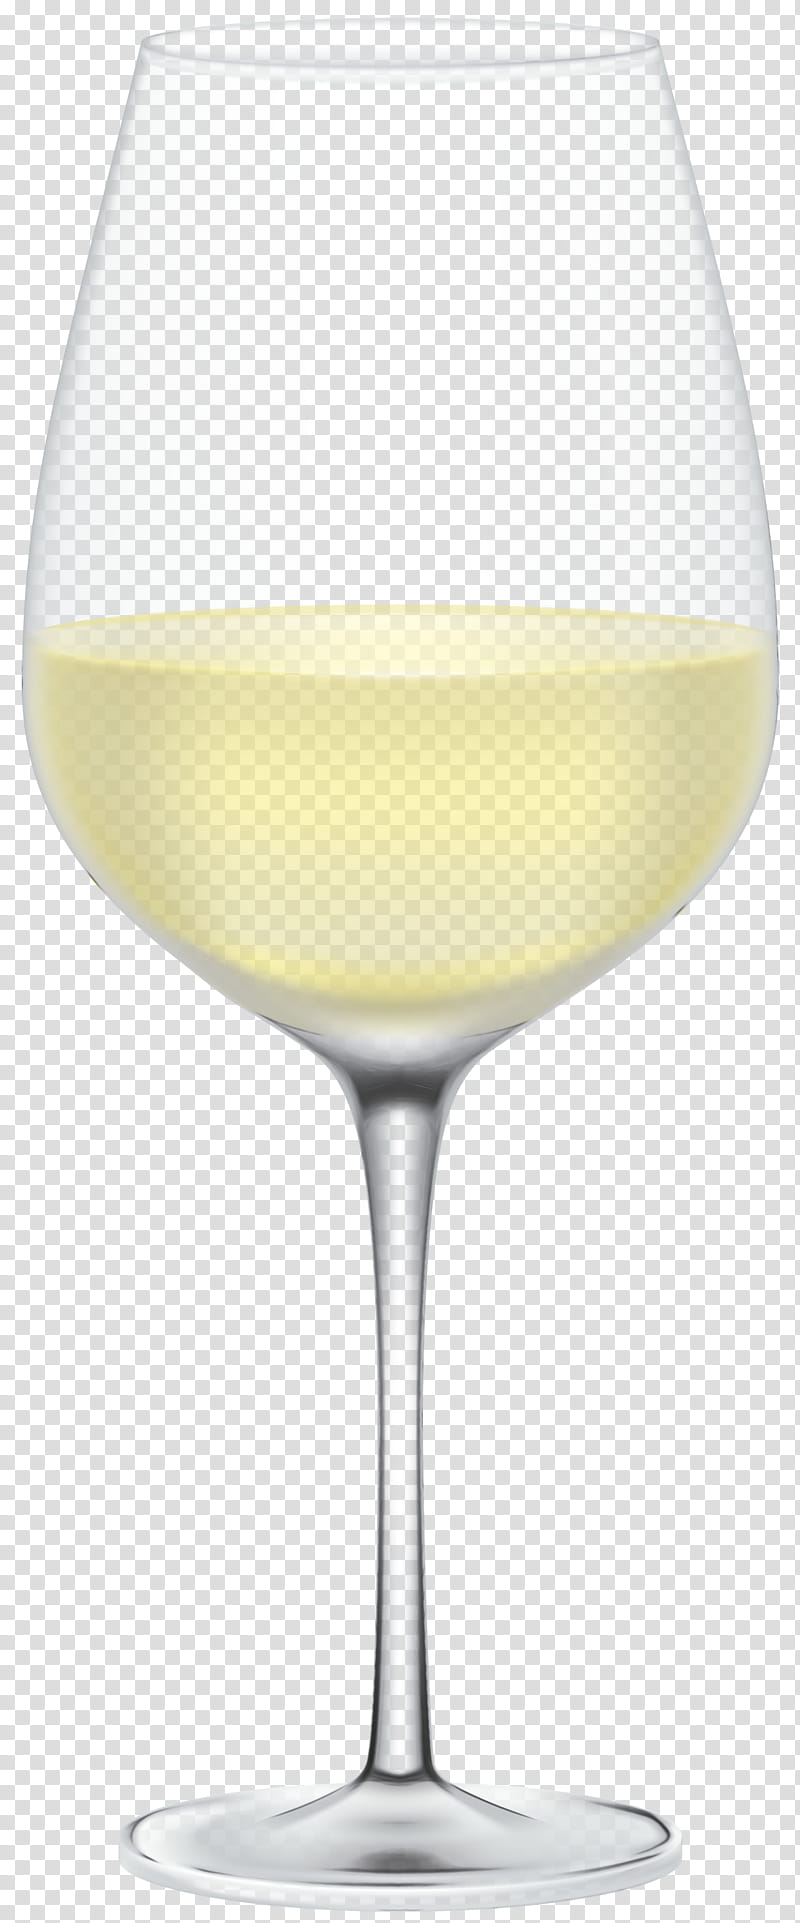 Champagne Glasses, Watercolor, Paint, Wet Ink, Wine Glass, White Wine, Beer Glasses, Yellow transparent background PNG clipart